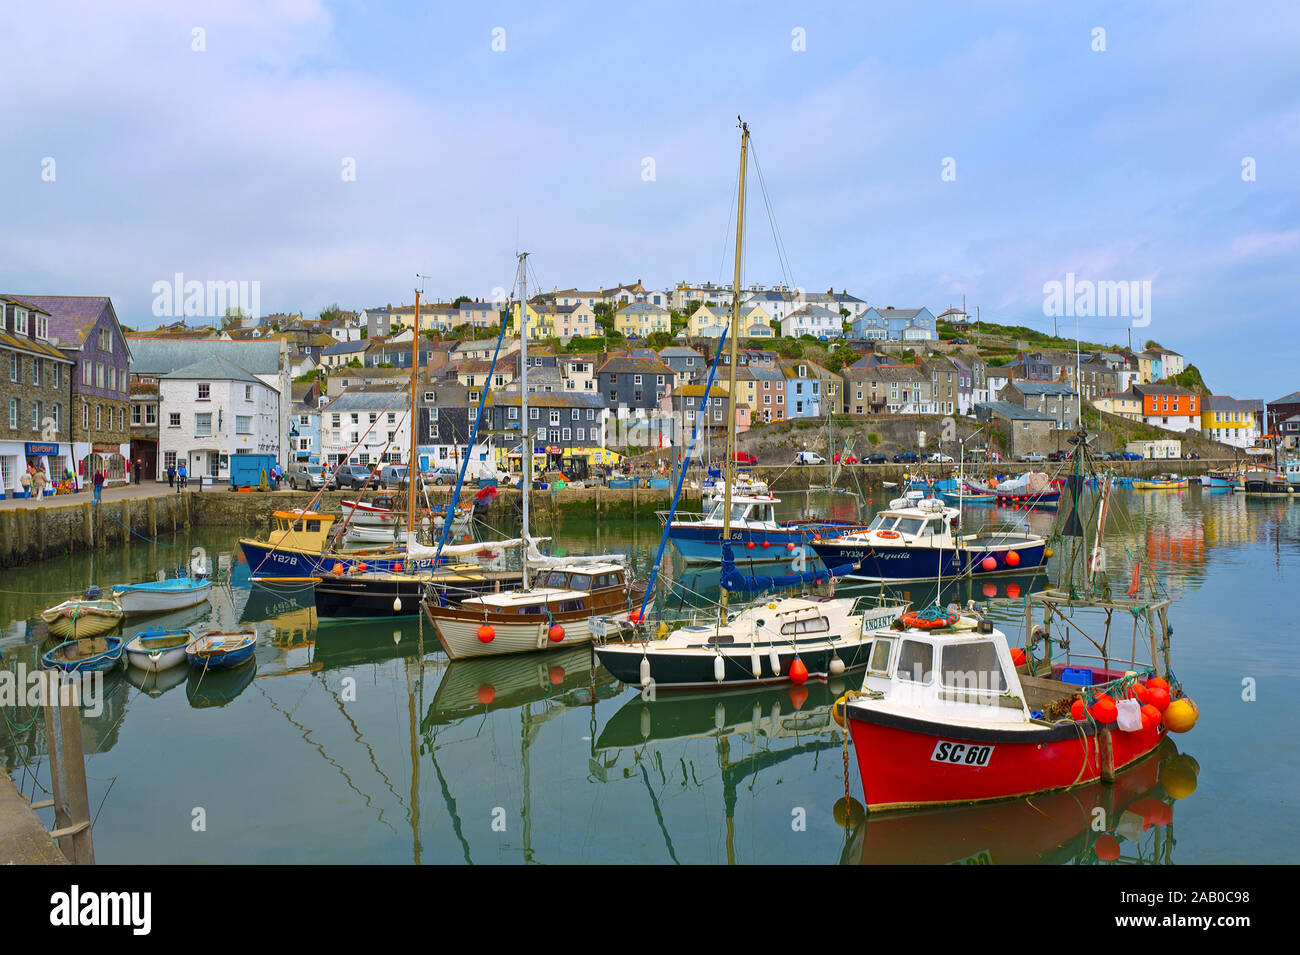 Mevagissey - a beautiful scenic fishing port and harbour in the county of Cornwall, England. Stock Photo